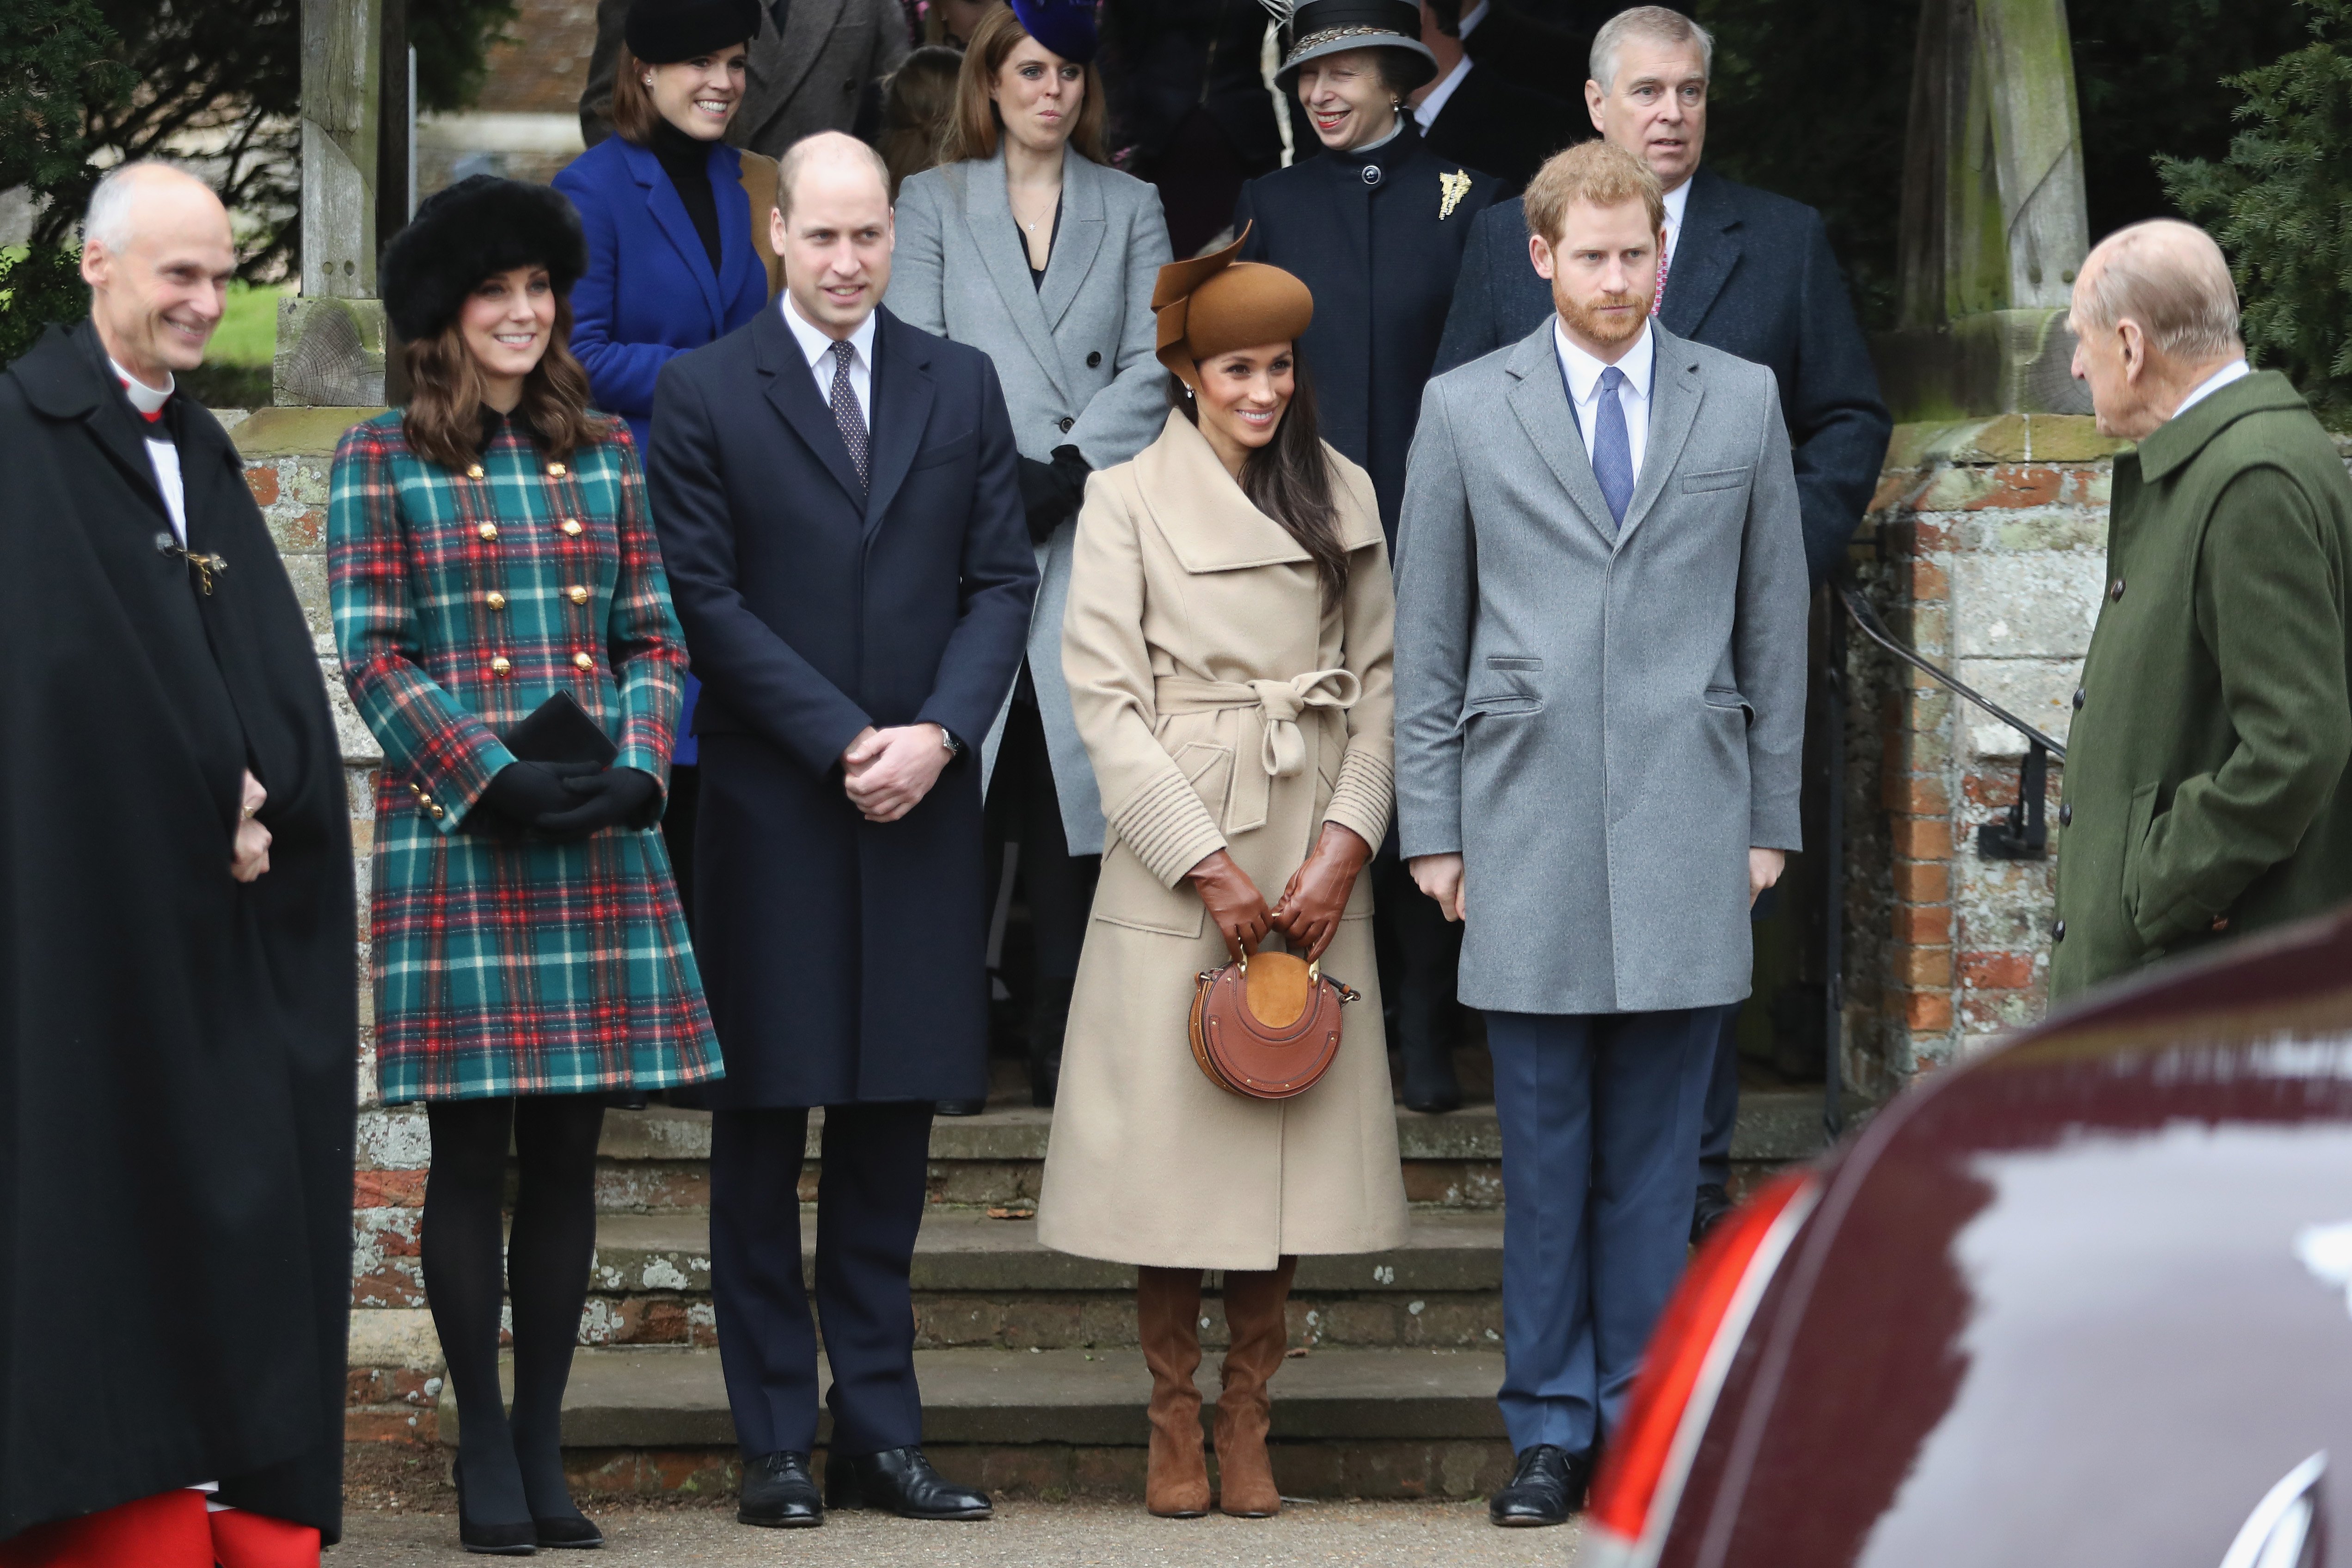 The Cambriges and Sussexes pictured together at the royal family Christmas in Sandringham, Norfolk, 2017. | Photo: Getty Images